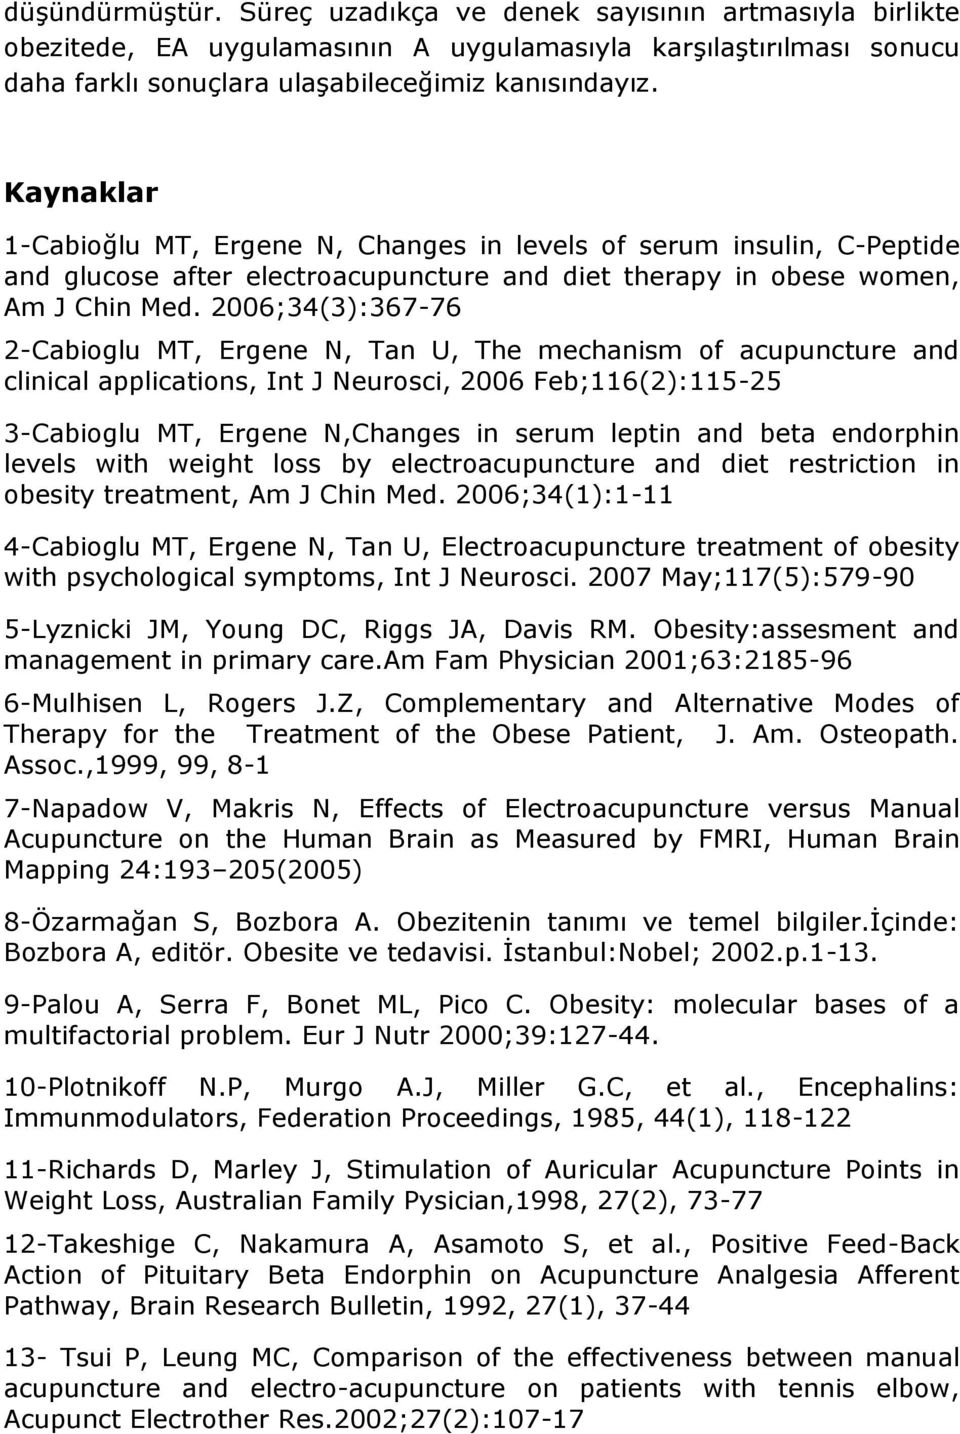 2006;34(3):367-76 2-Cabioglu MT, Ergene N, Tan U, The mechanism of acupuncture and clinical applications, Int J Neurosci, 2006 Feb;116(2):115-25 3-Cabioglu MT, Ergene N,Changes in serum leptin and